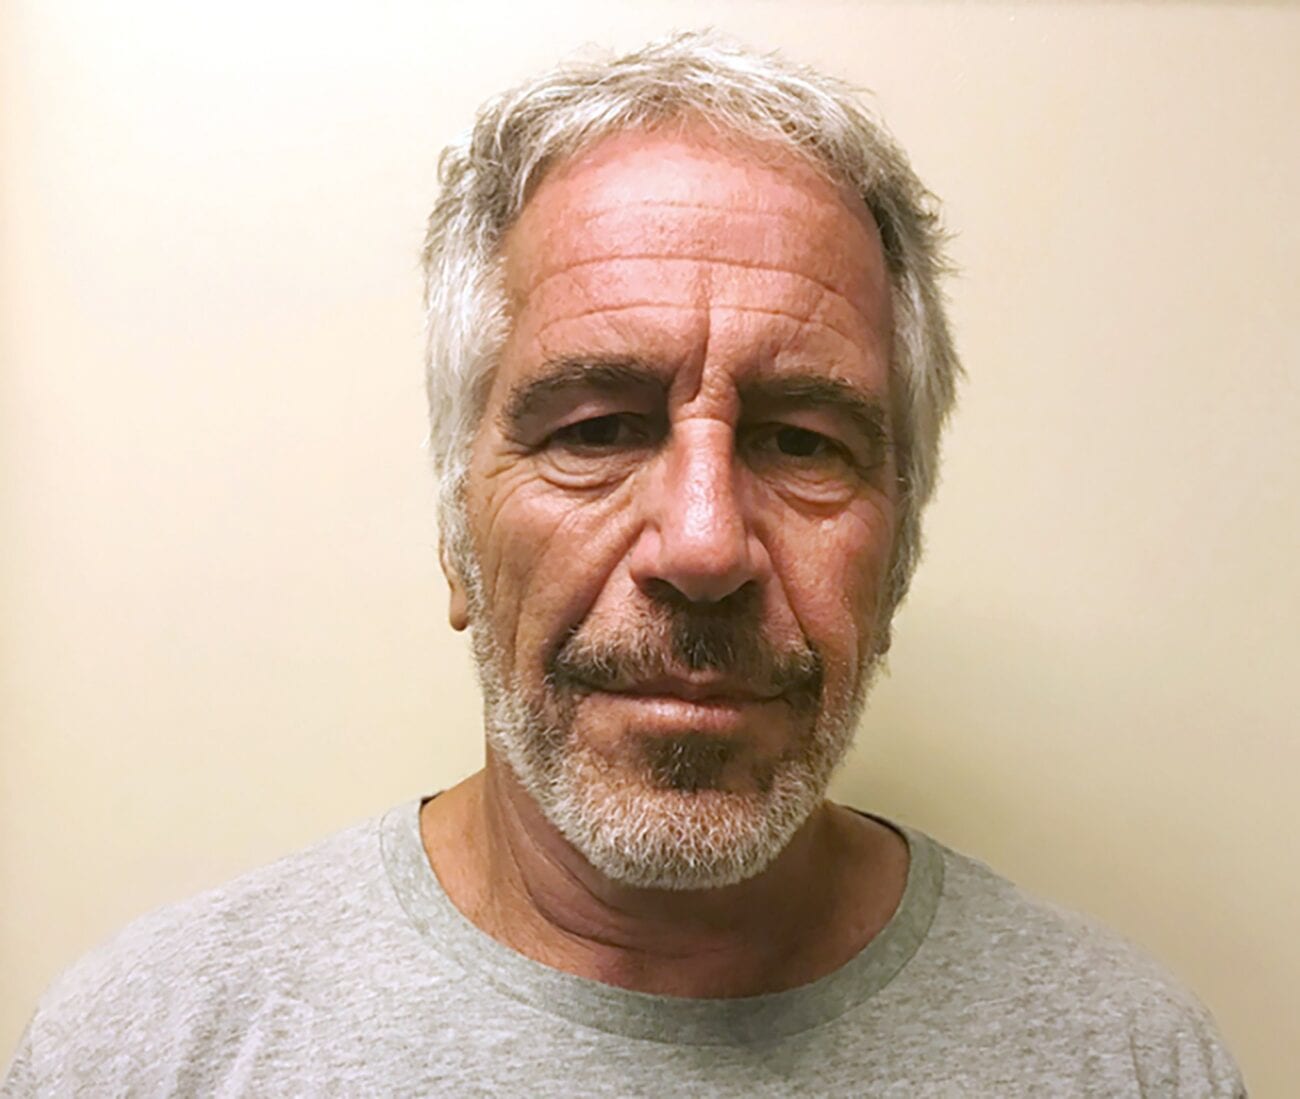 A new leak of documents related to Jeffrey Epstein's island raises questions about who visited. The list of names has been released!